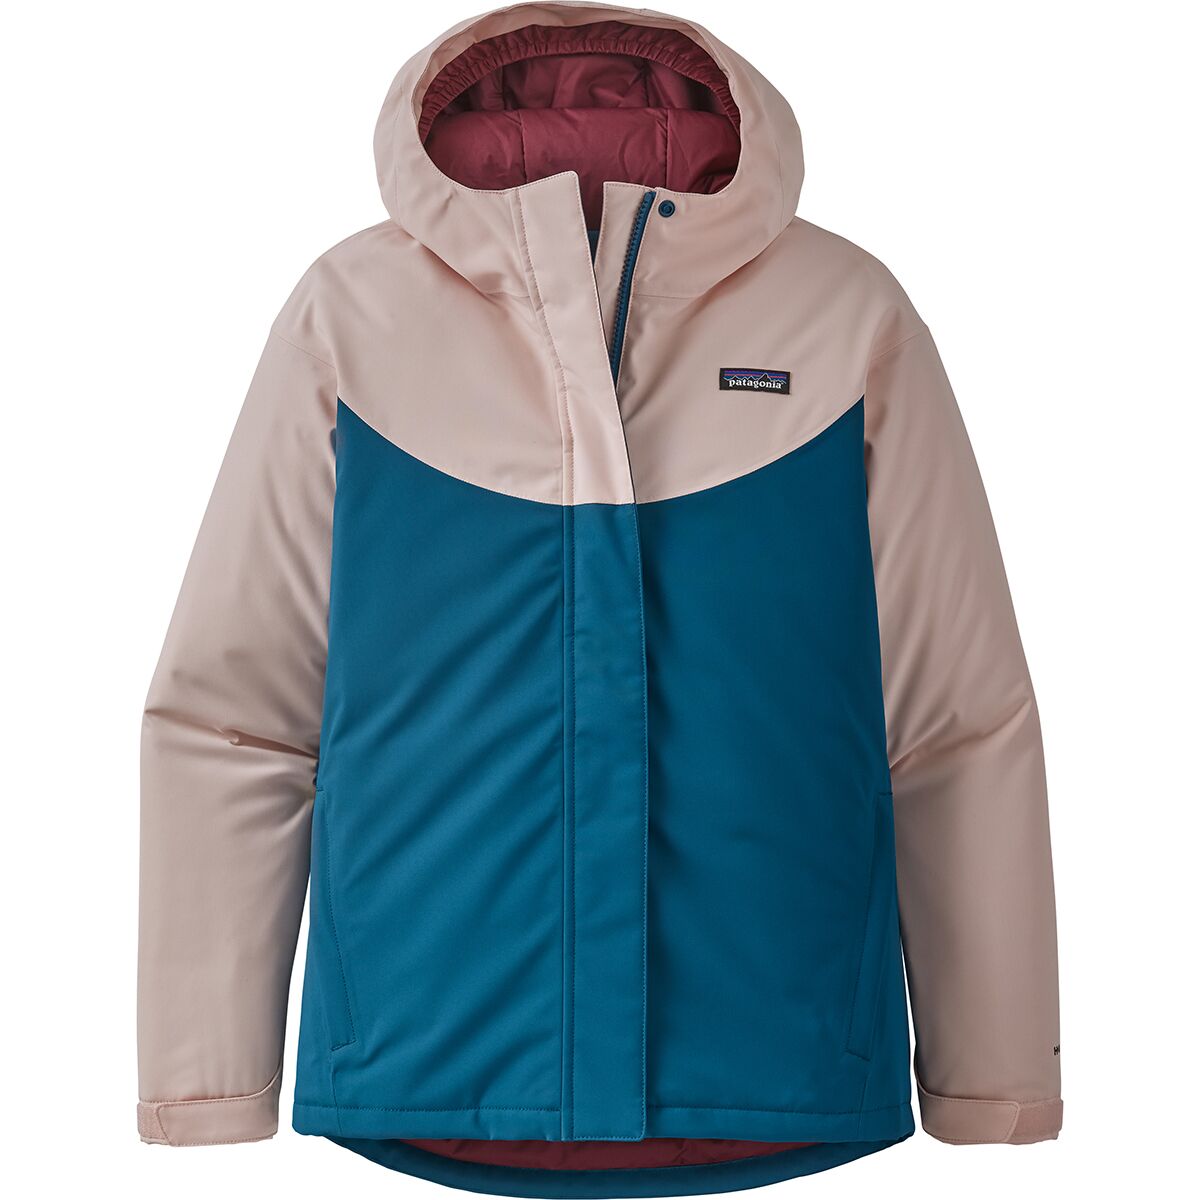 Patagonia Everyday Ready Jacket - Girls' Crater Blue